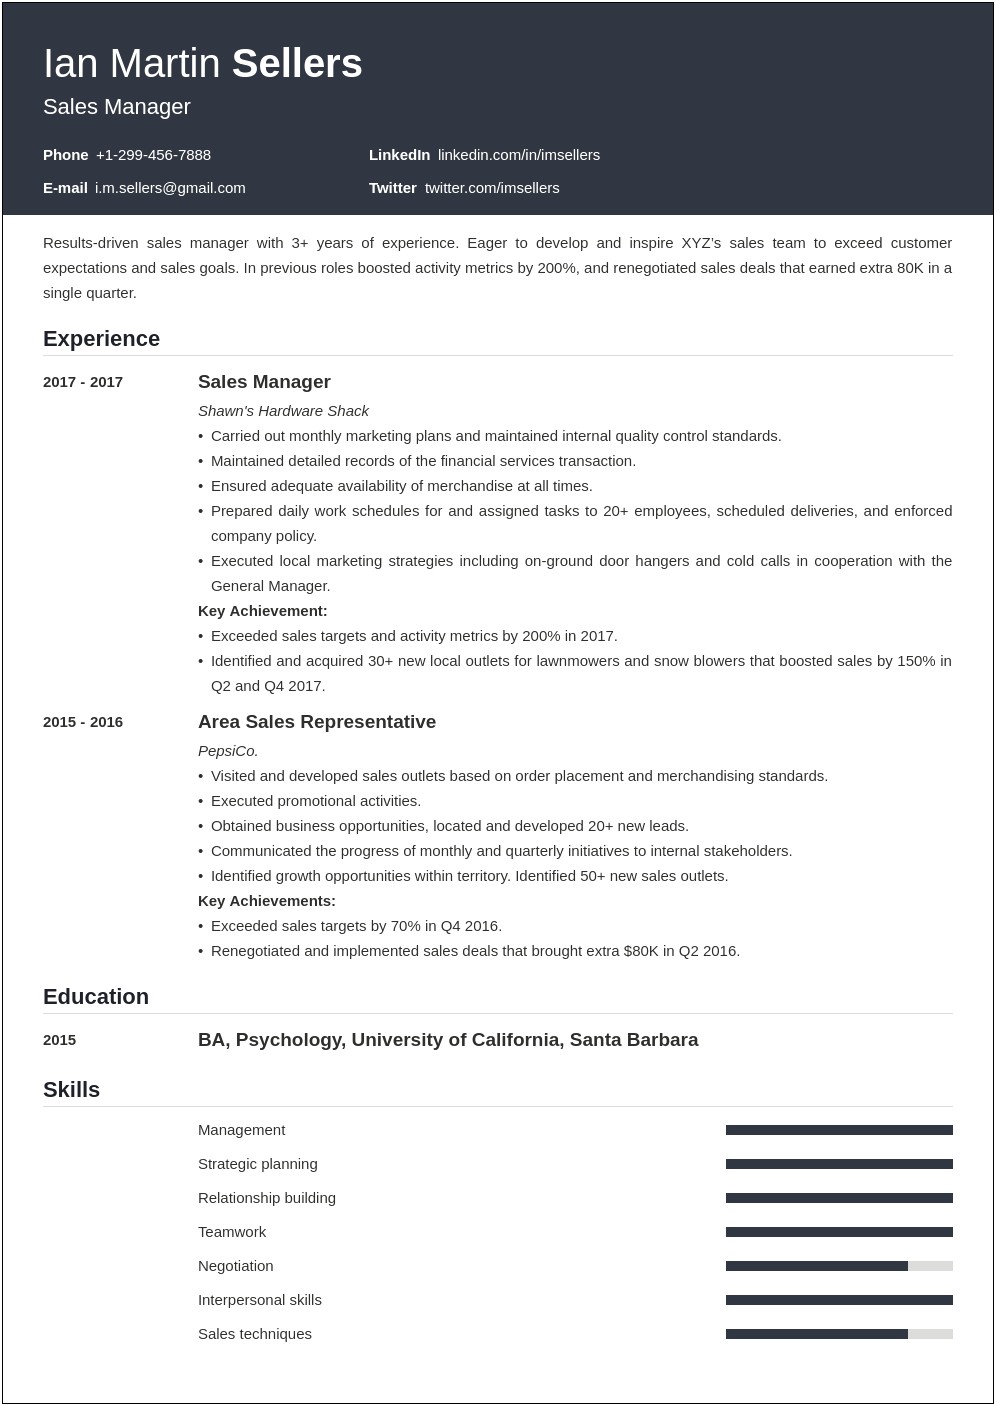 Resume For Sales Manager With No College Degree